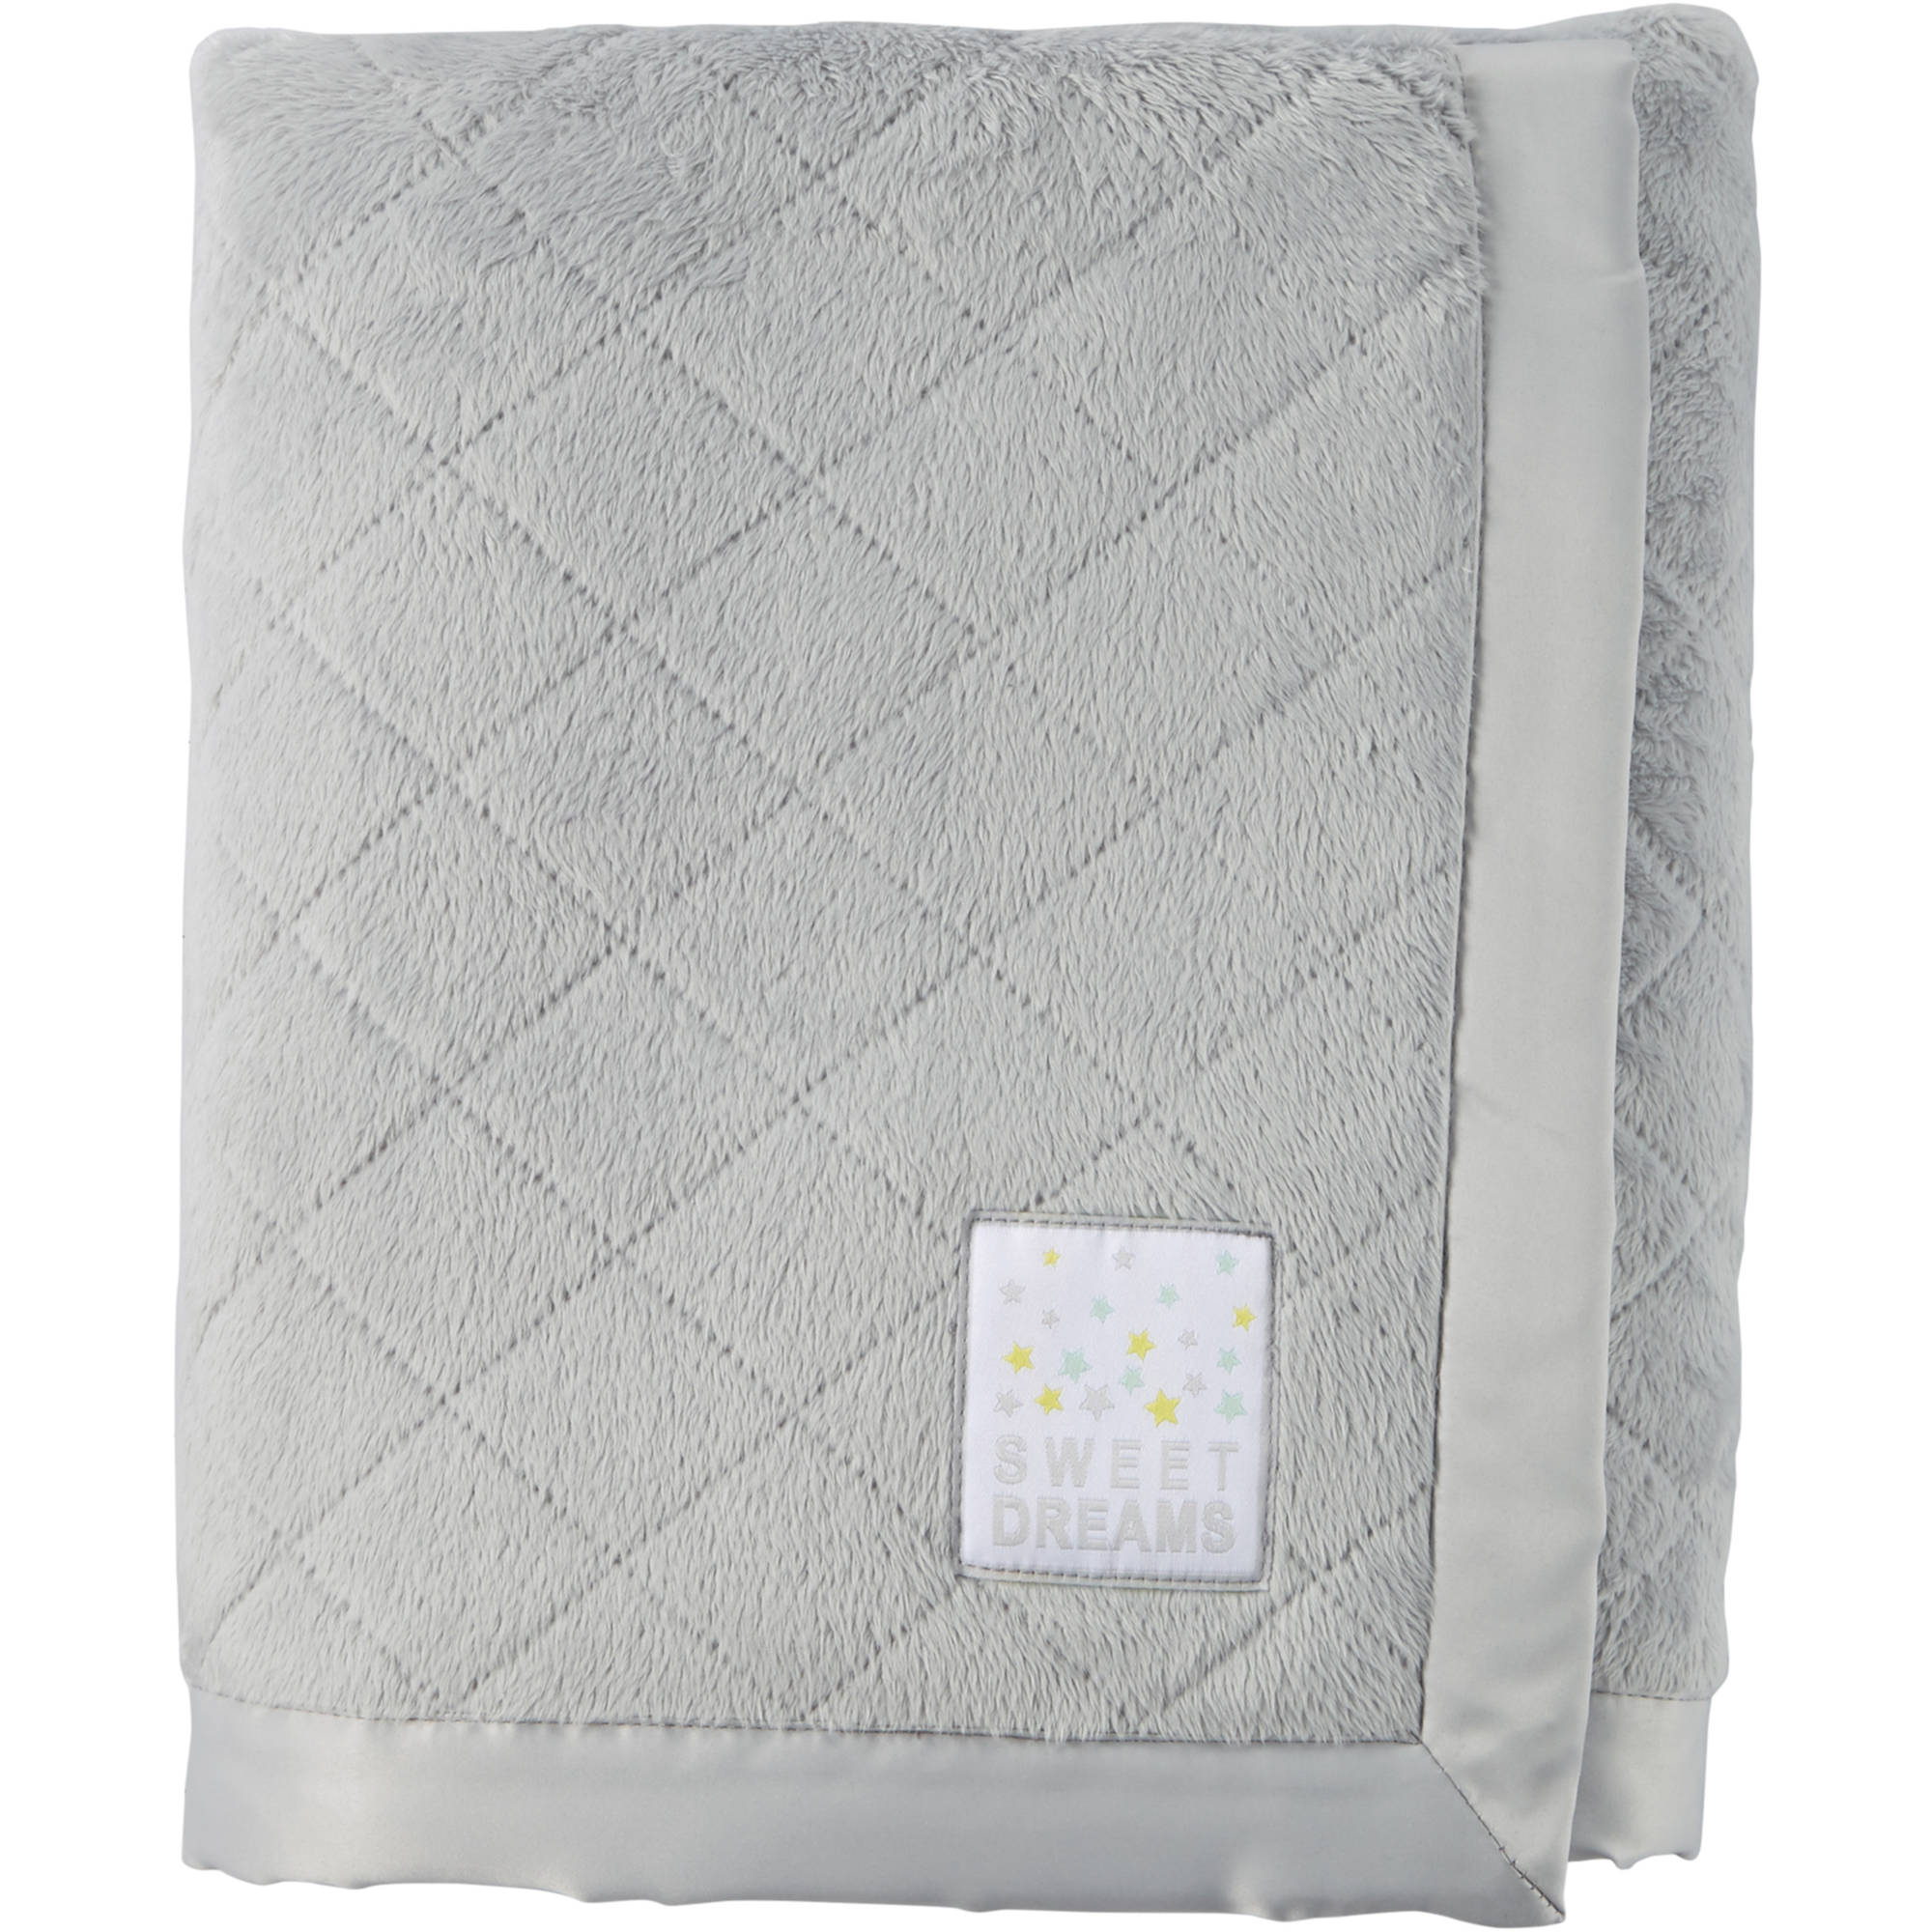 Child of Mine Newborn Quilted Baby Blanket, Gray - image 1 of 1